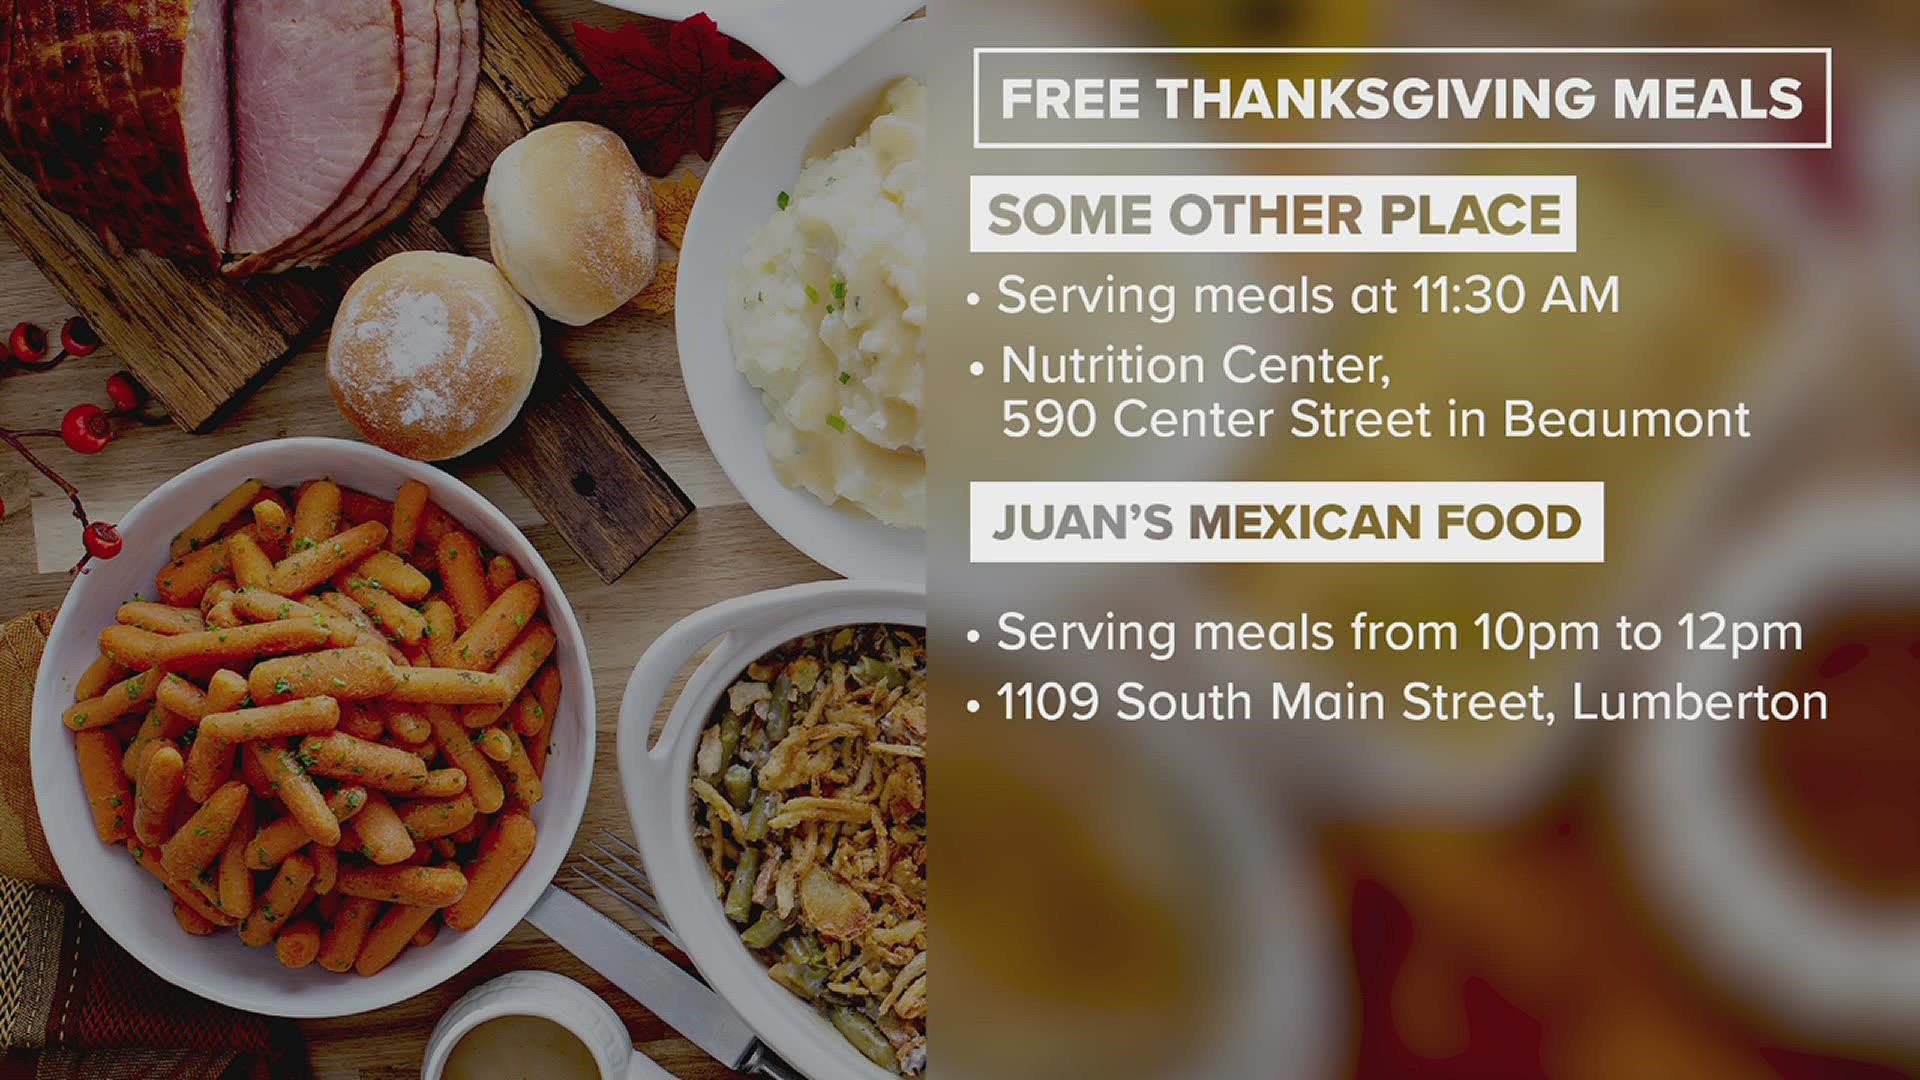 For Southeast Texans who are wondering where they can purchase, or receive a free Thanksgiving meal, there are options available.